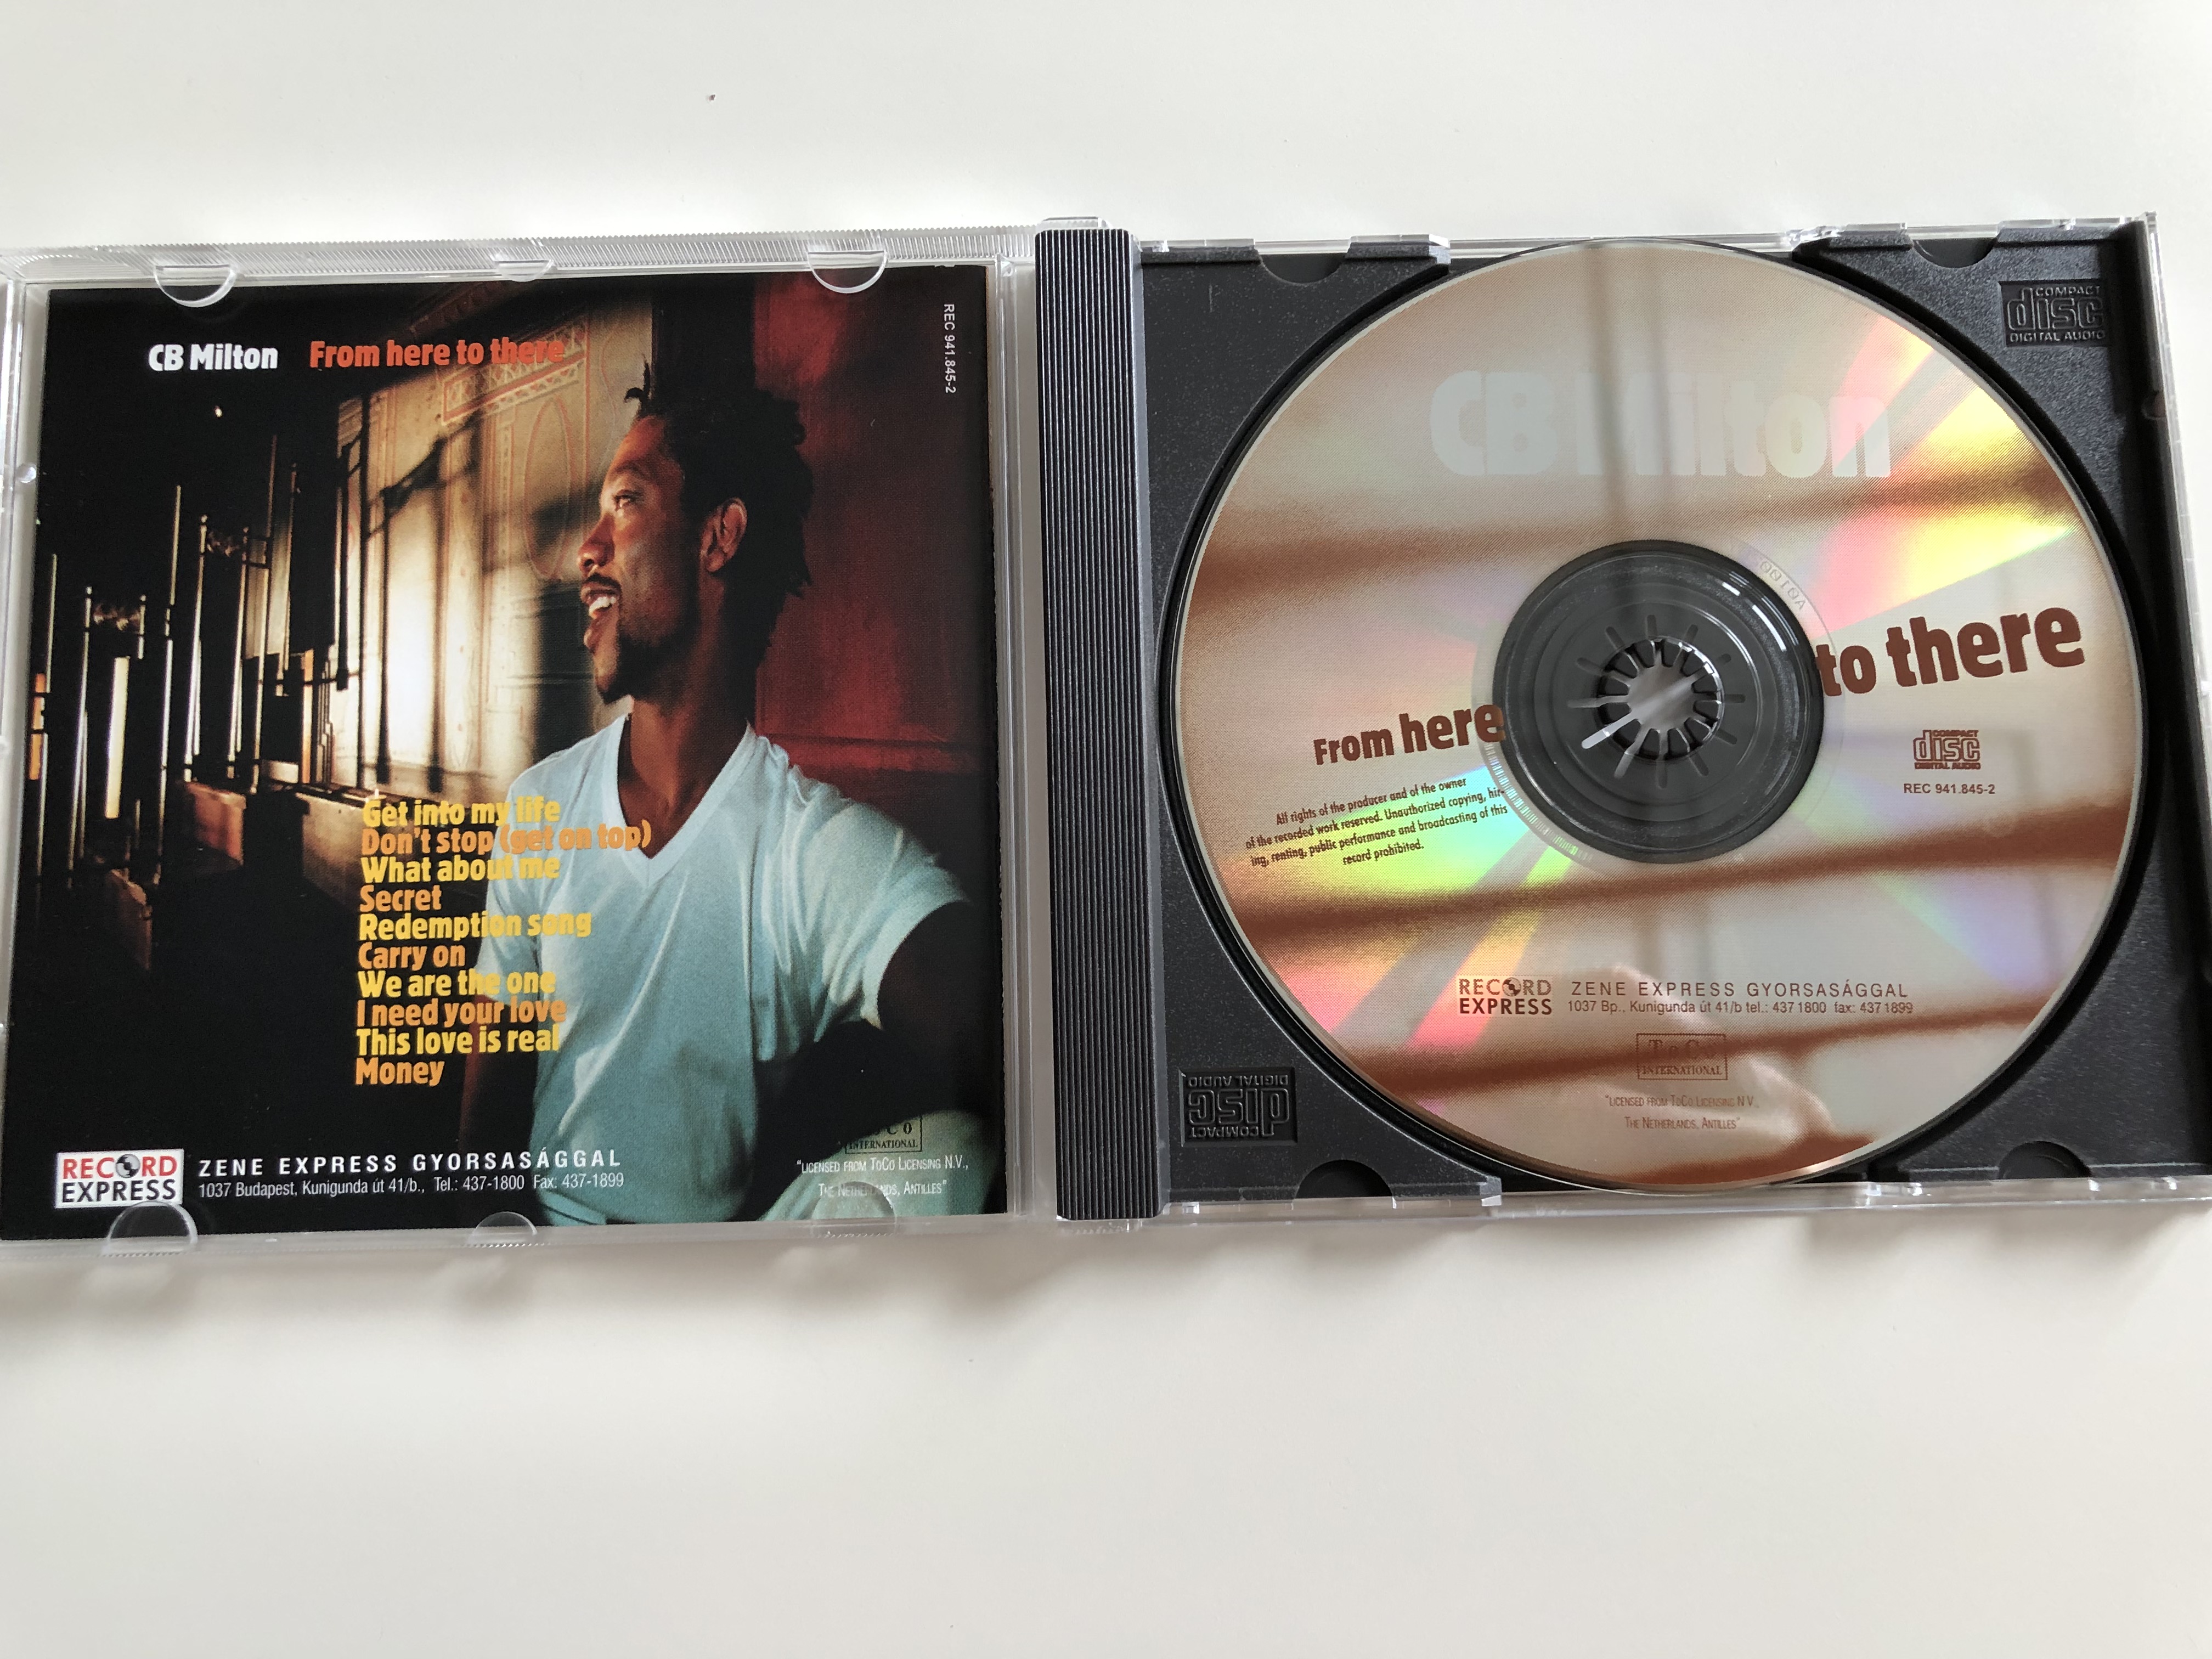 cb-milton-from-here-to-there-get-into-my-life-what-about-me-redemption-song-we-are-the-one-this-love-is-real-audio-cd-1998-byte-records-3-.jpg